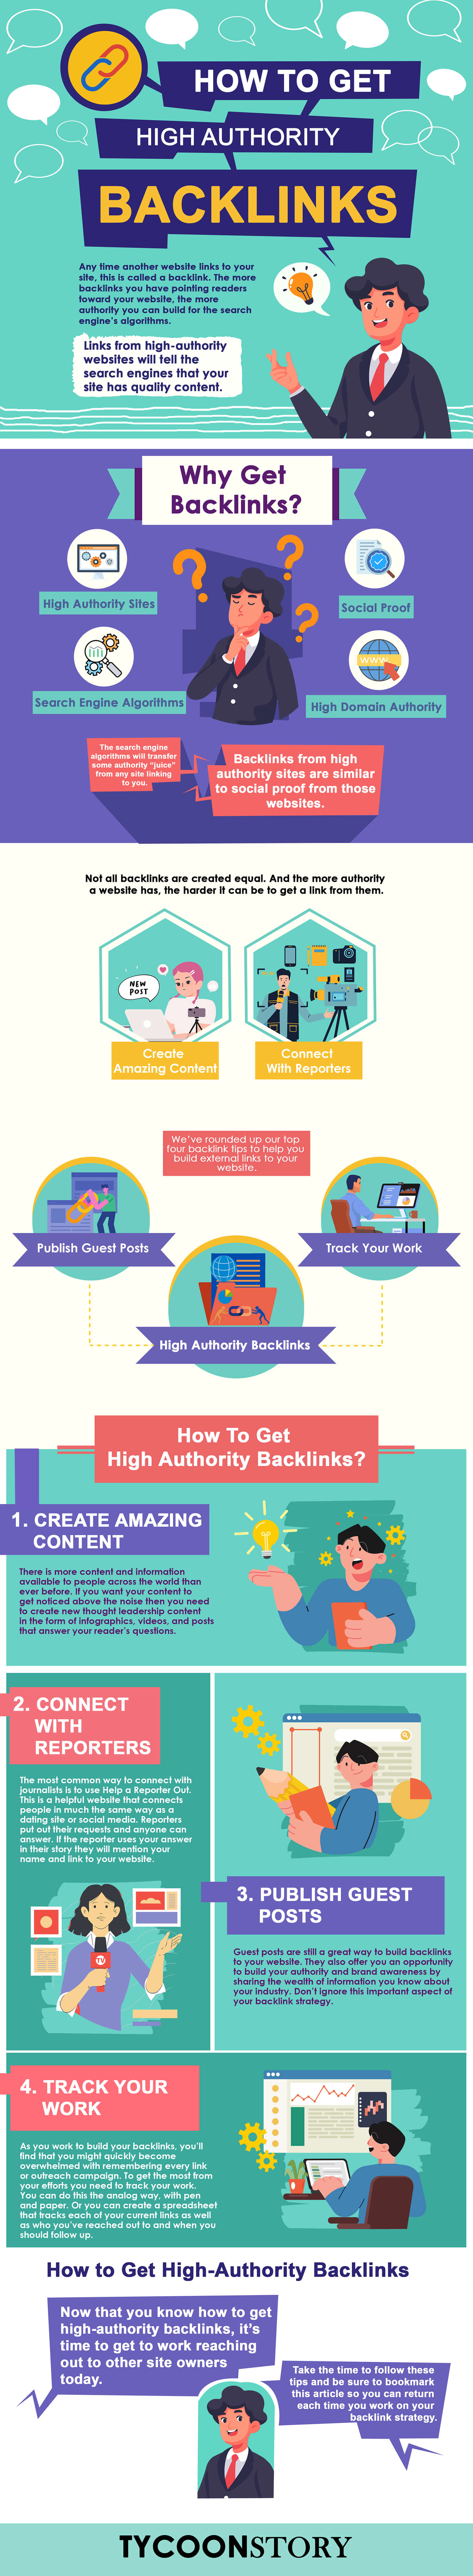 How to get high authority backlinks infographic